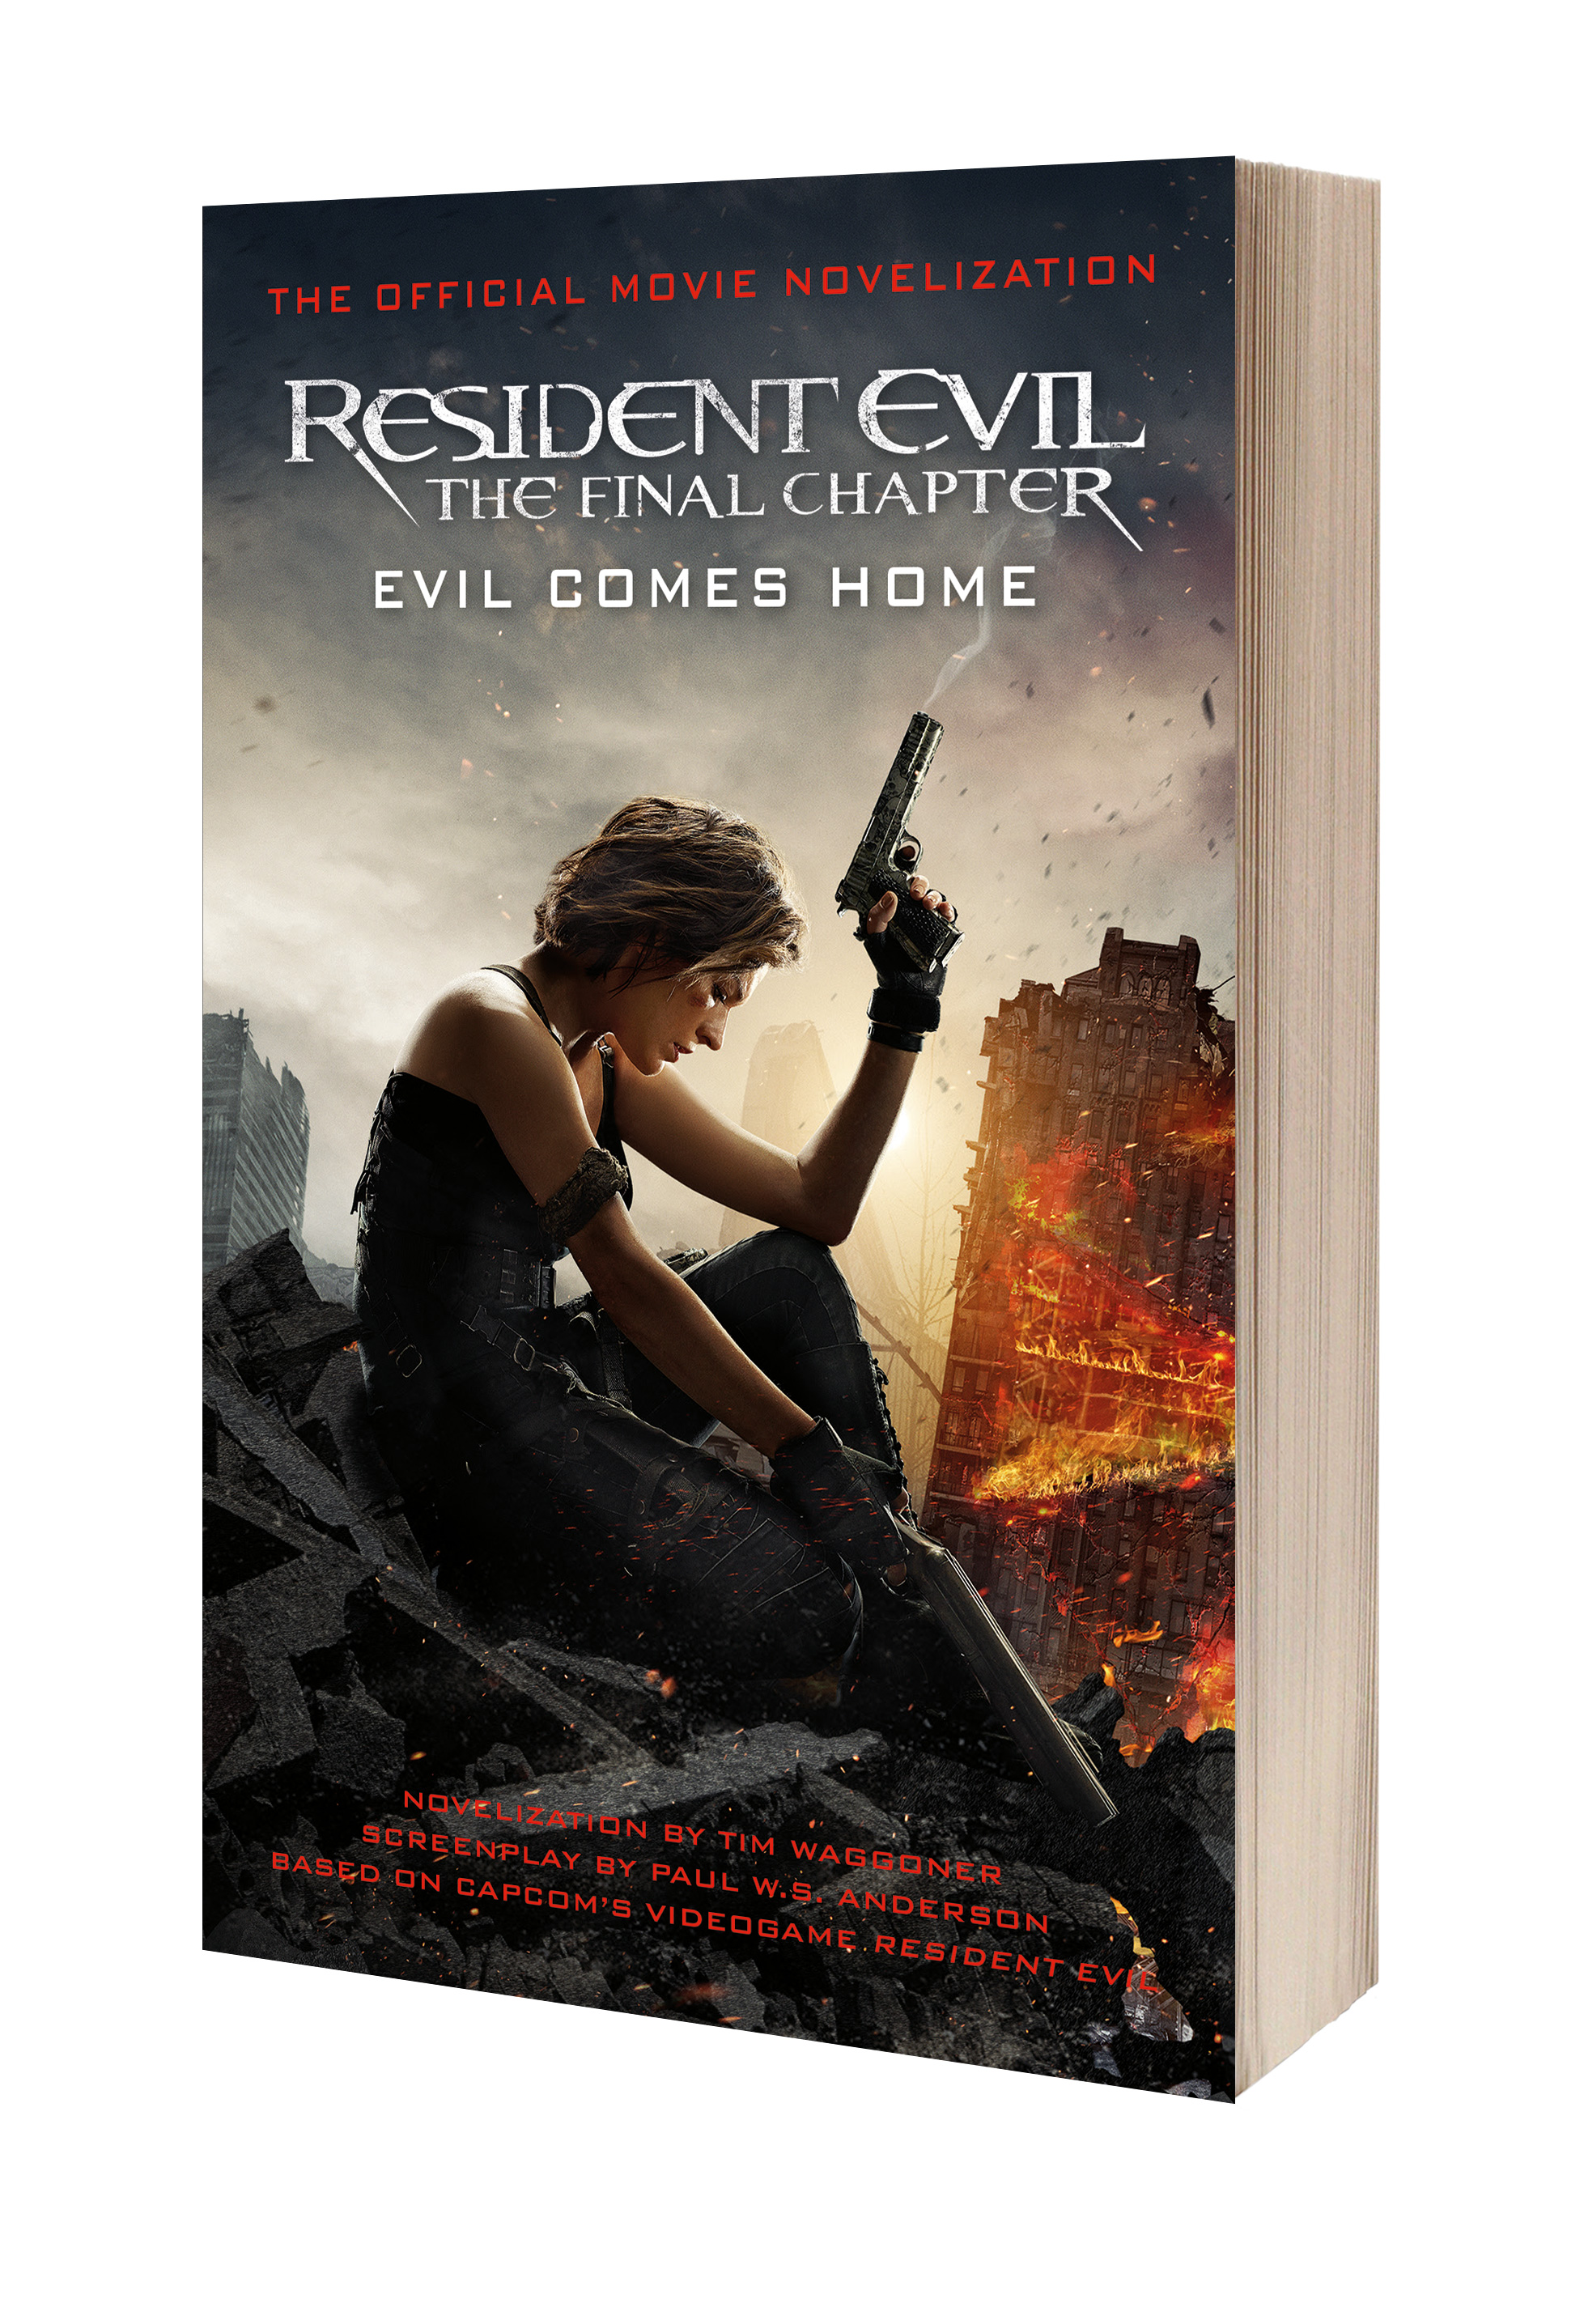 Resident Evil: The Final Chapter (The Official Movie Novelization) by Tim  Waggoner: 9781785652967 | : Books